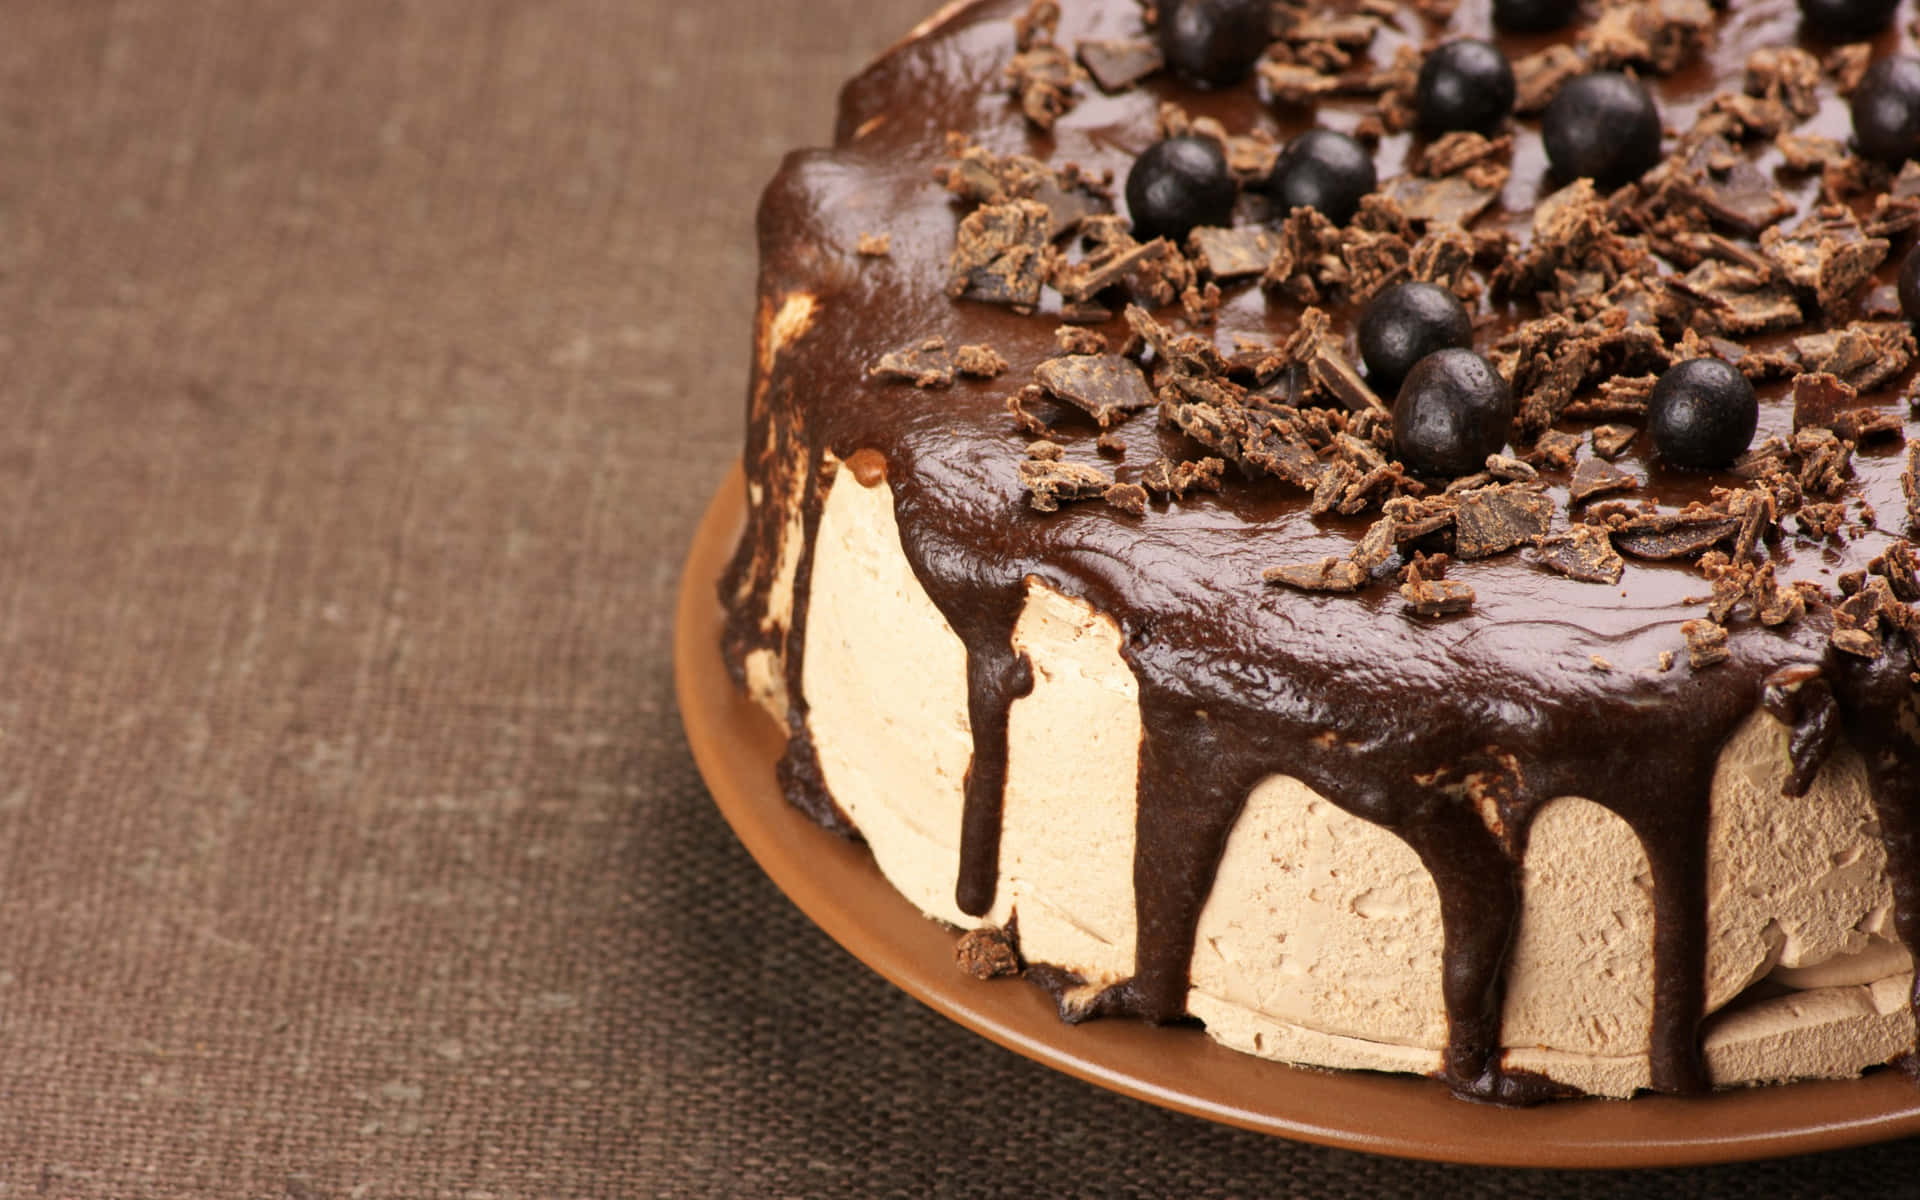 A Chocolate Cake With Chocolate Icing And Chocolate Shavings